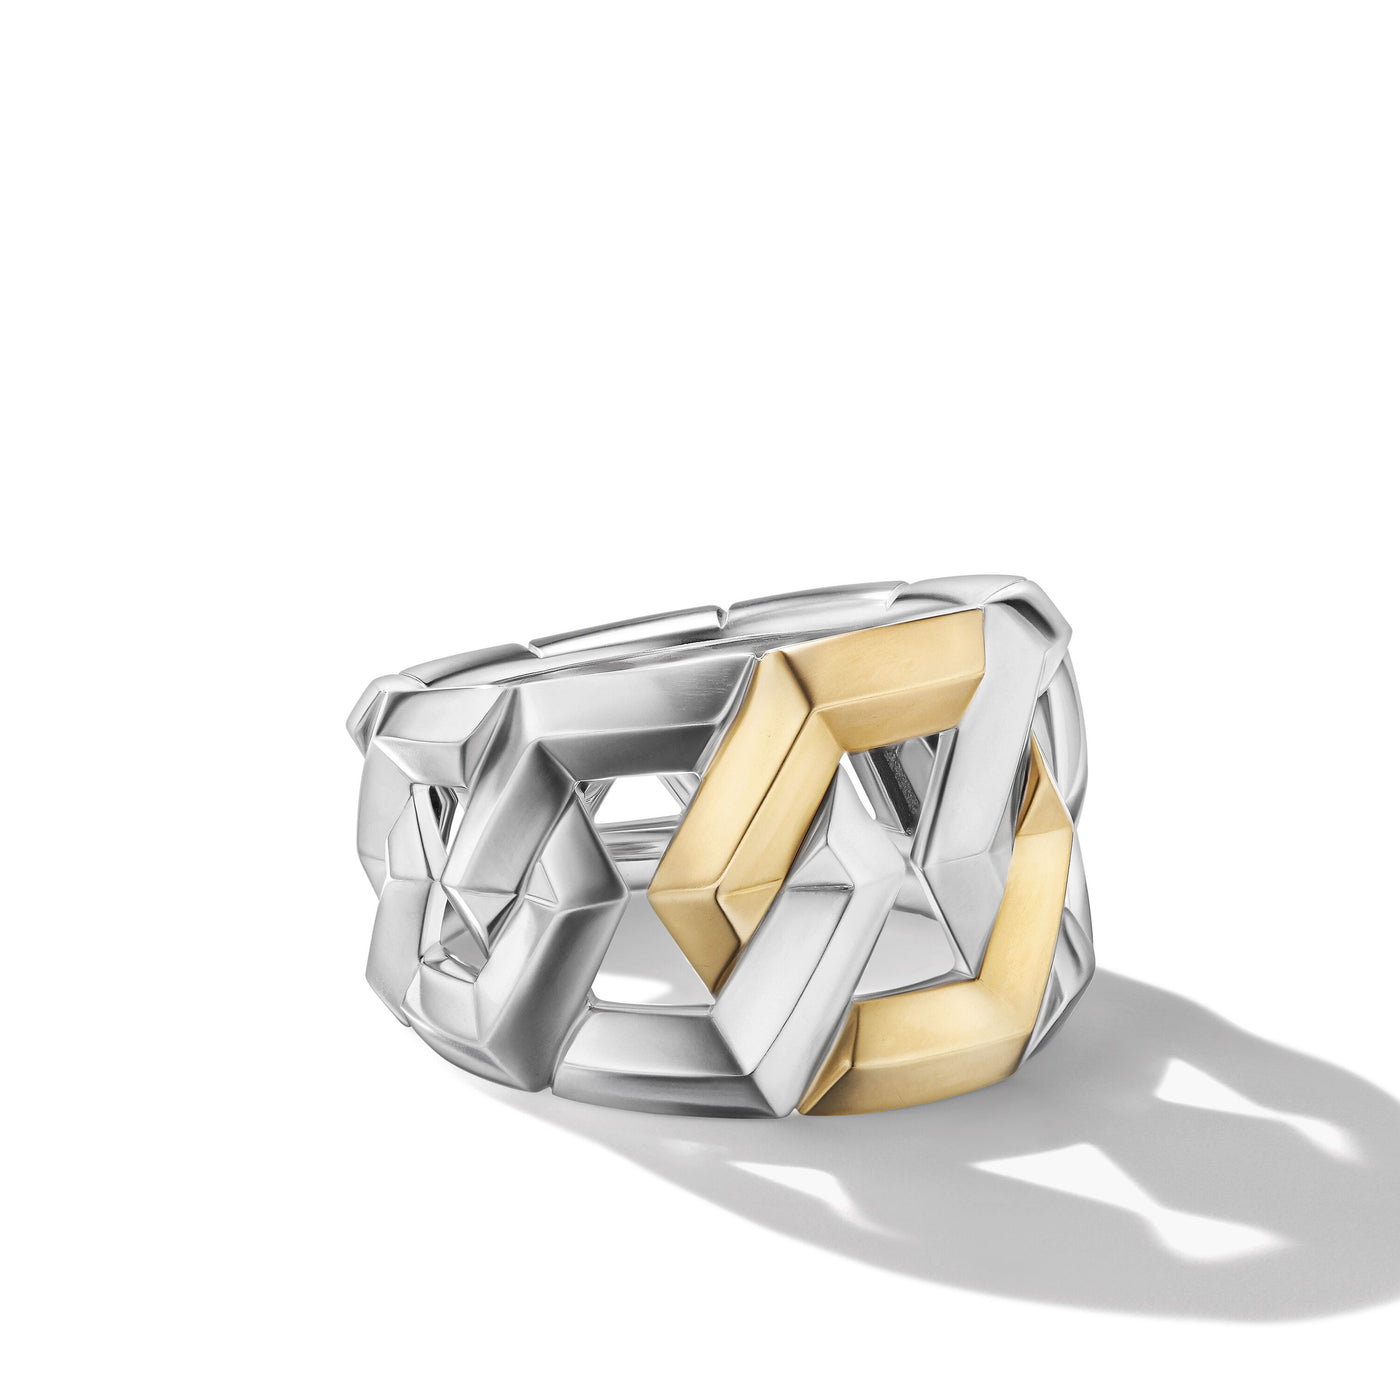 Carlyle™ Ring in Sterling Silver with 18K Yellow Gold\, 15mm